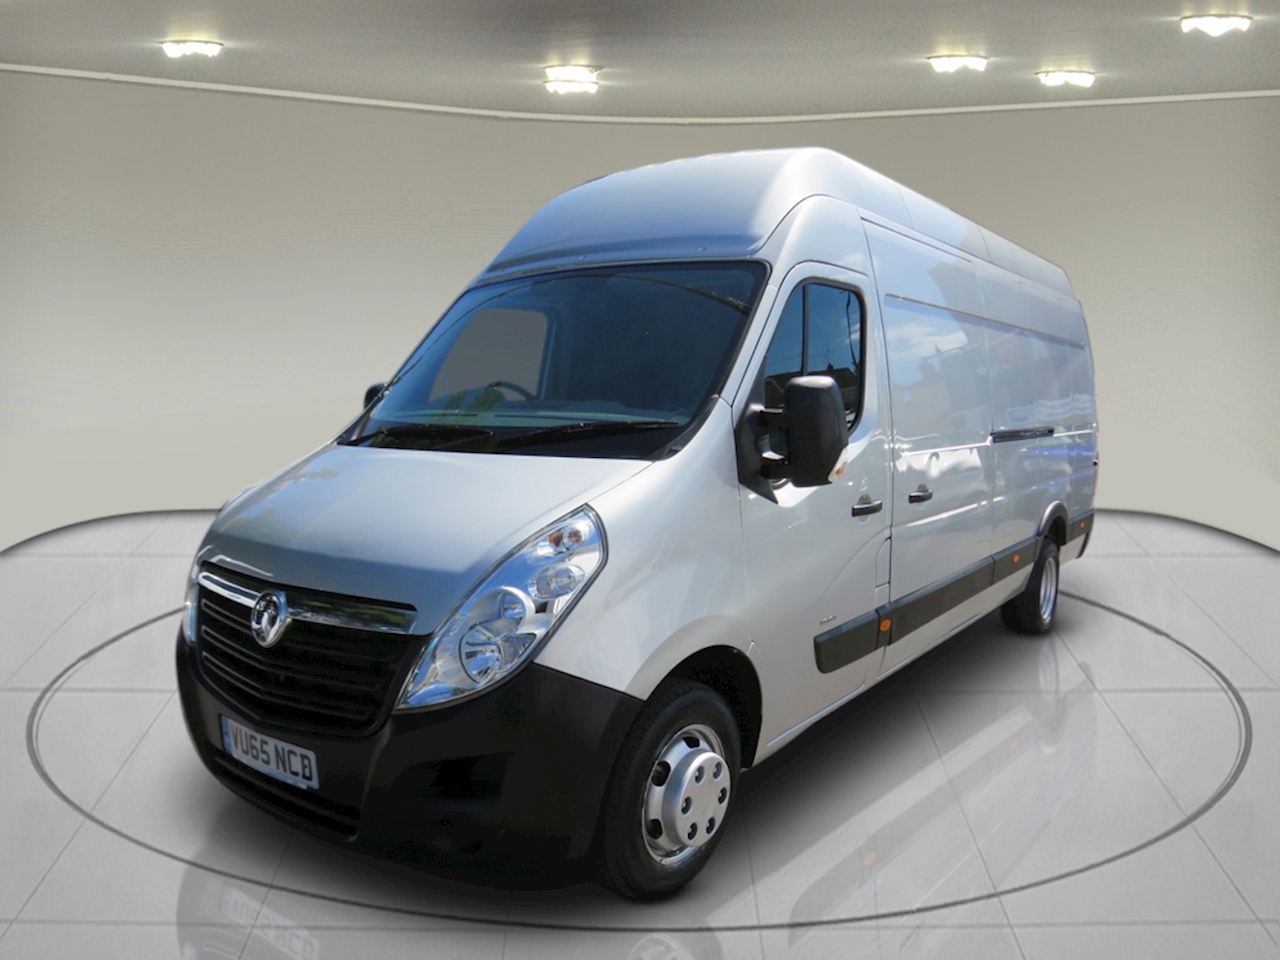 Real Road Test: 2015 Vauxhall Movano! (Renault Master, Opel Movano, Nissan  NV400) 